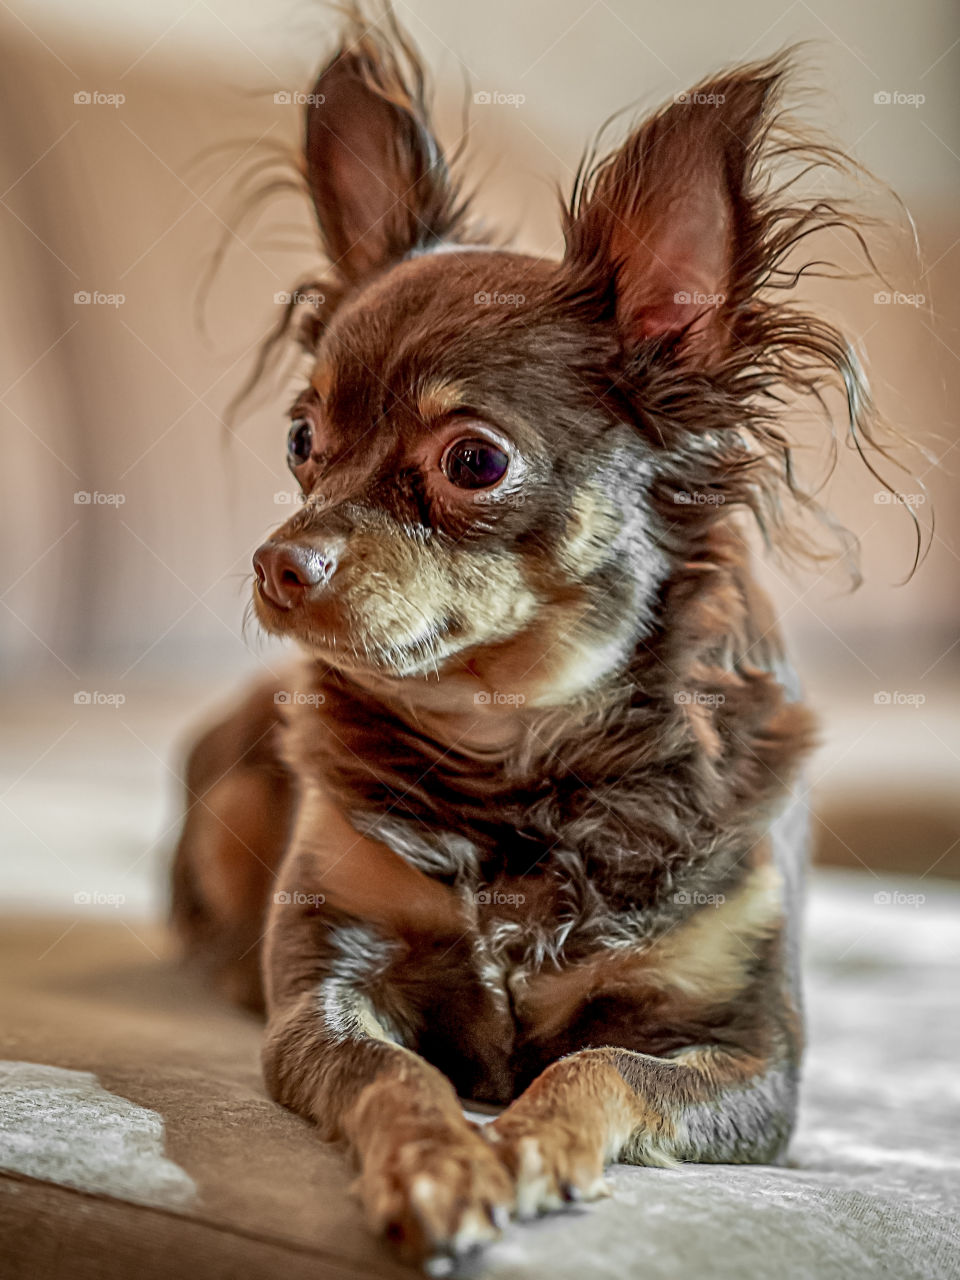 Small dog breed Russian Toy-Terrier chocolate brown color lies on the sofa on a light background.